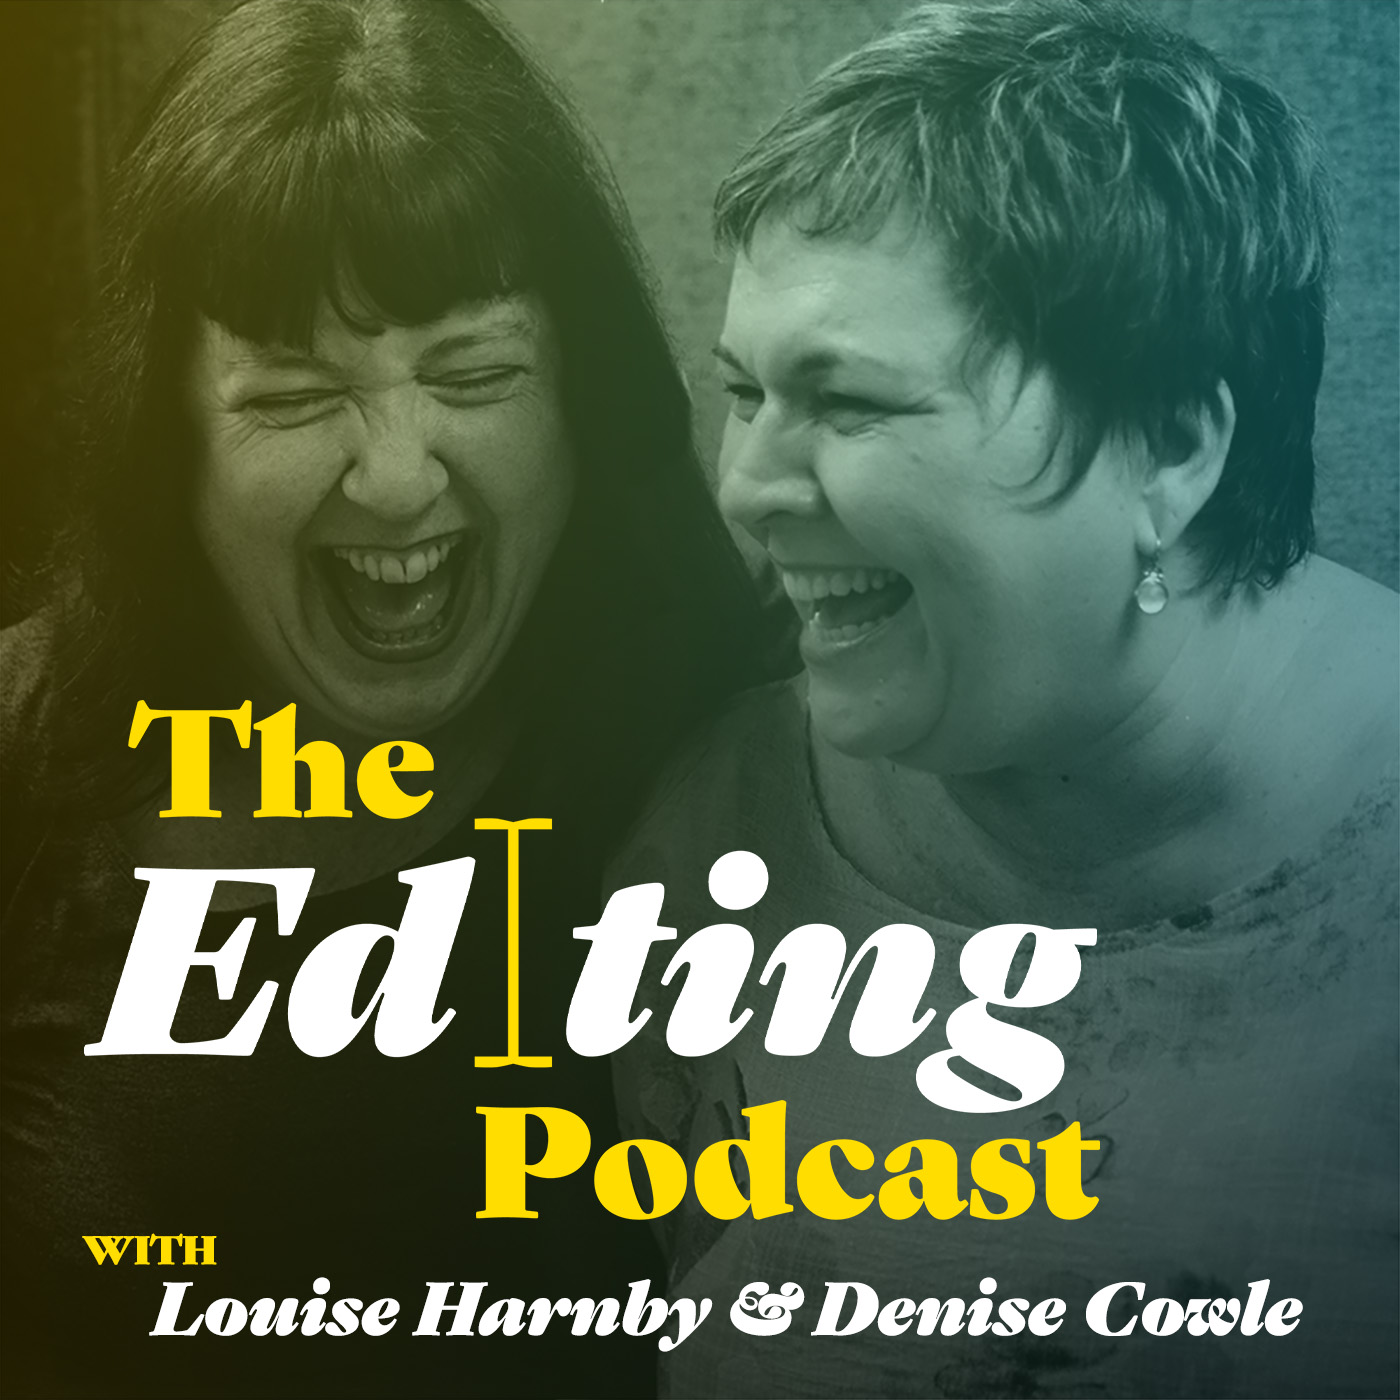 Show artwork for The Editing Podcast